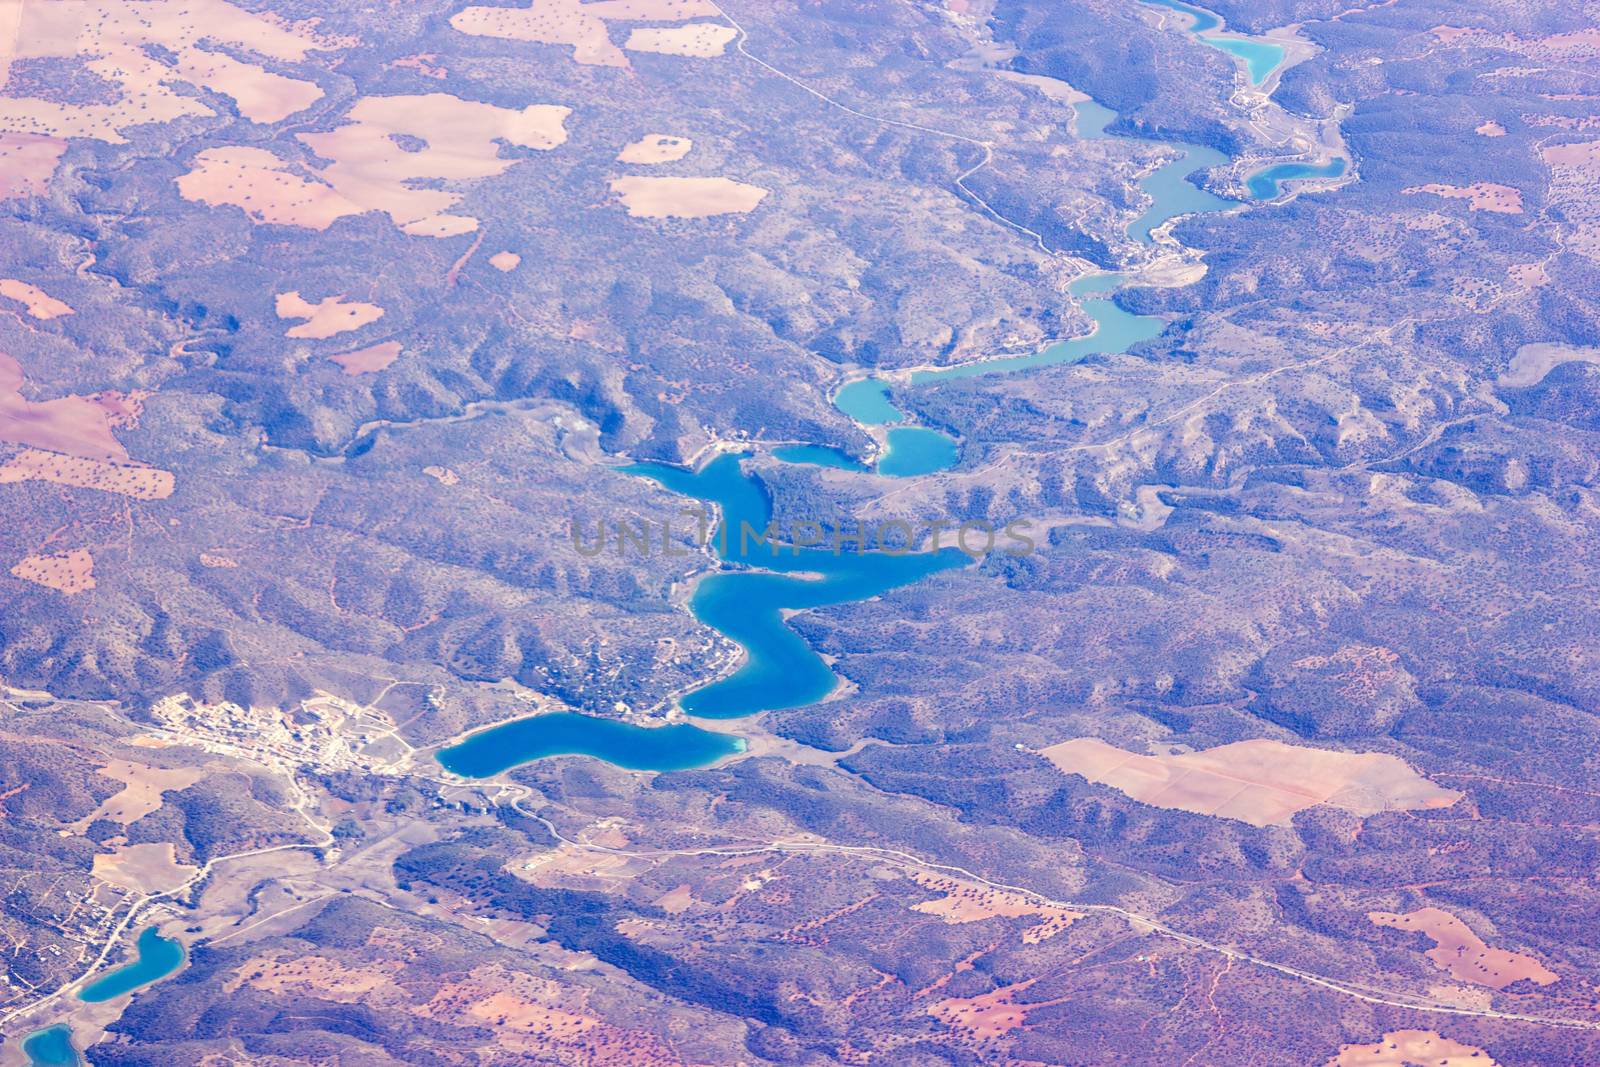 Aerial view of Spain with fields and lakes by miradrozdowski